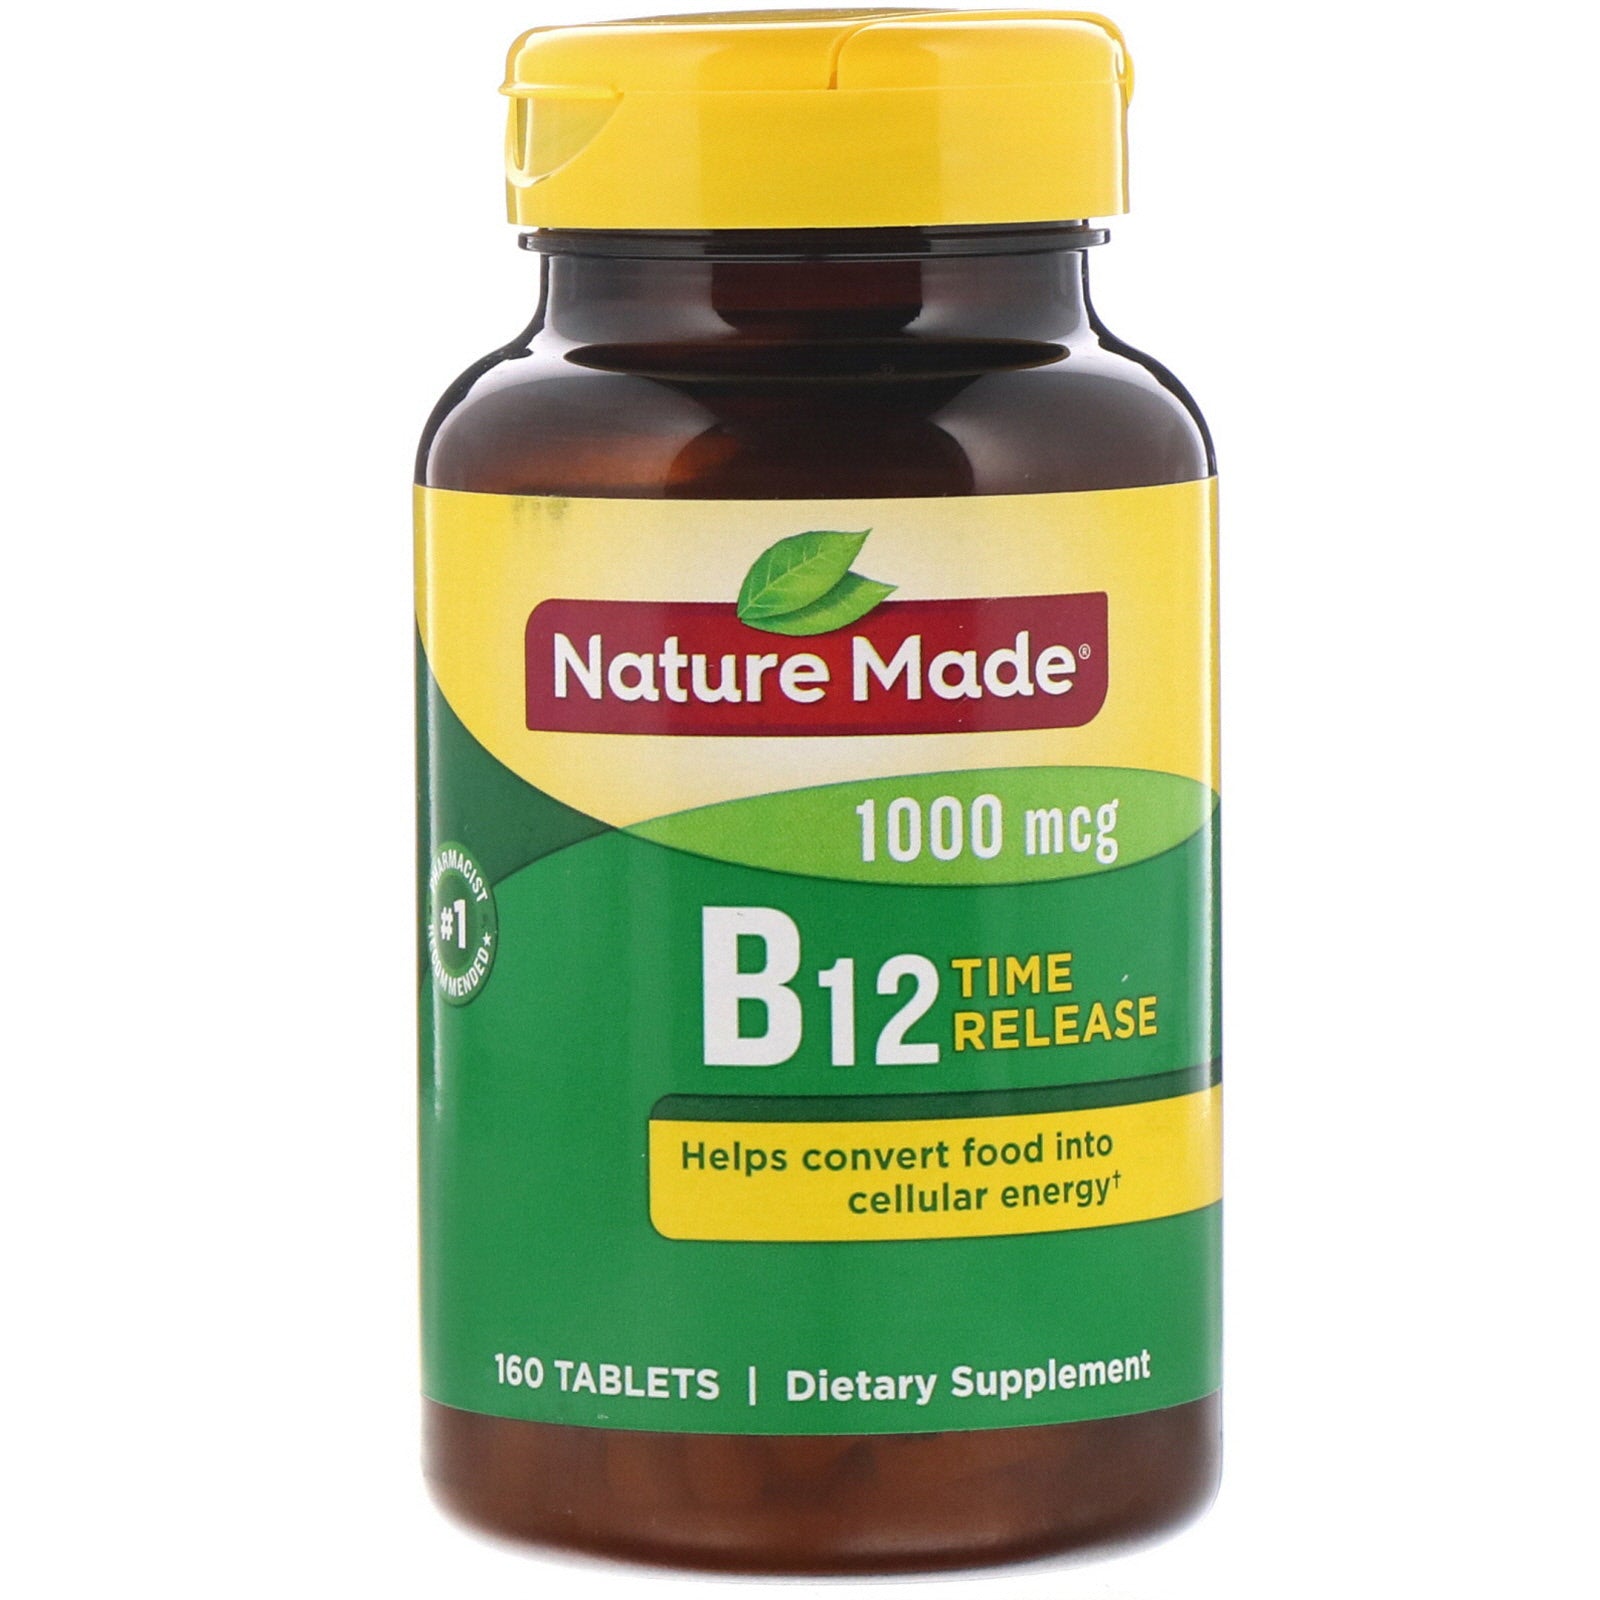 Nature Made, Vitamin B12, Time Release, 1,000 mcg, 160 Tablets